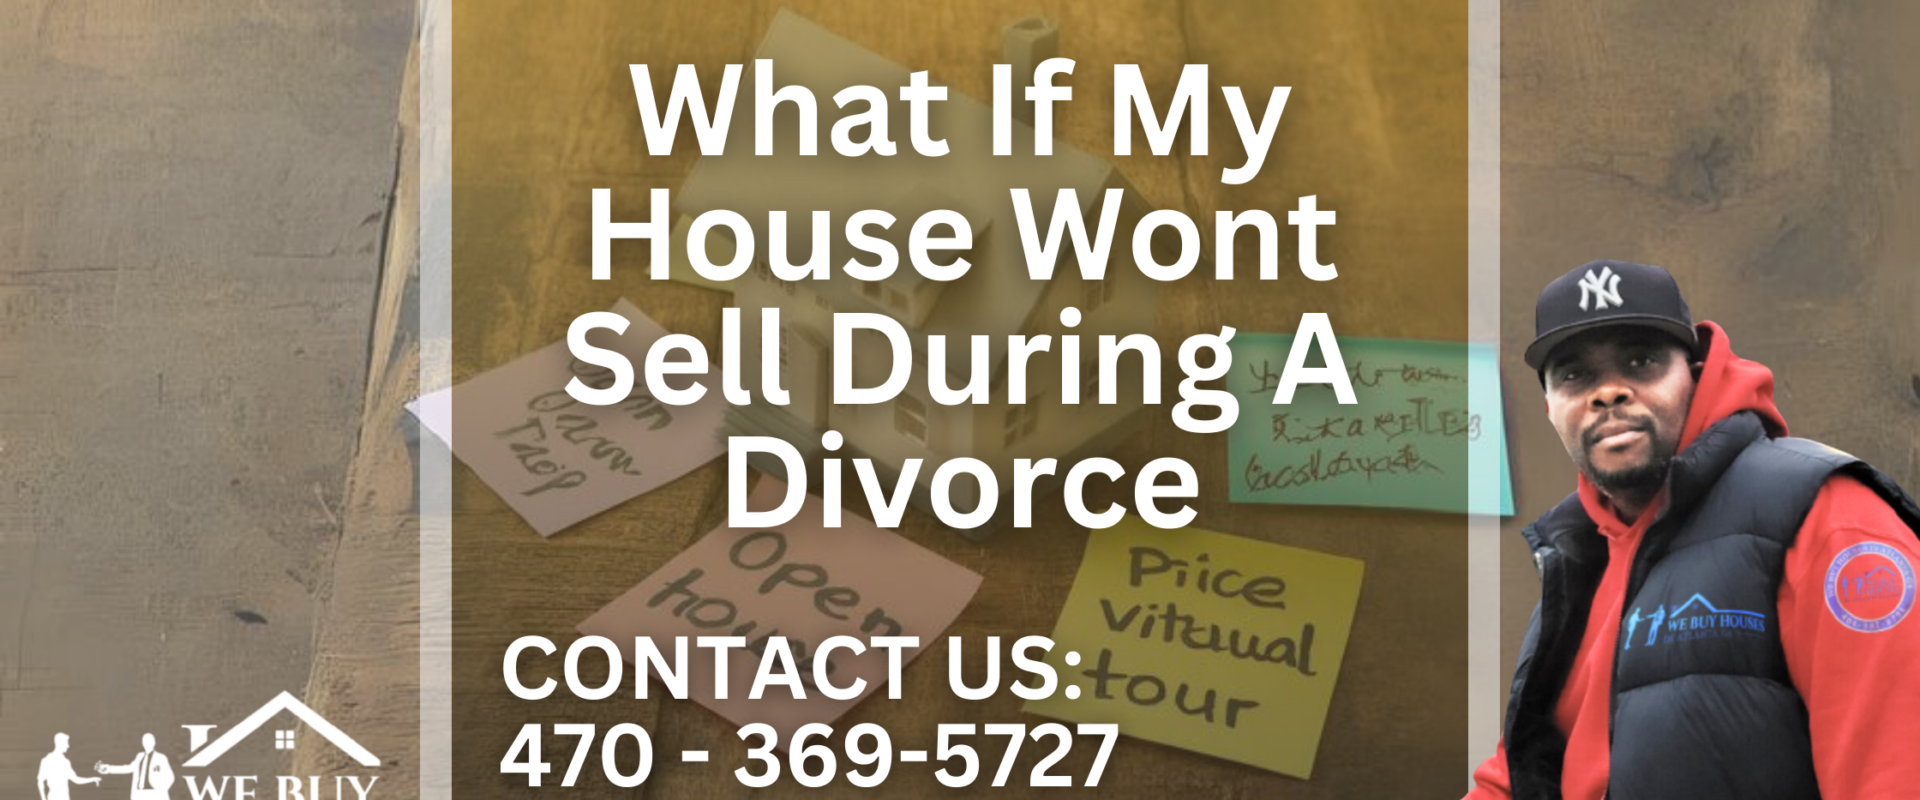 What If My House Wont Sell During A Divorce